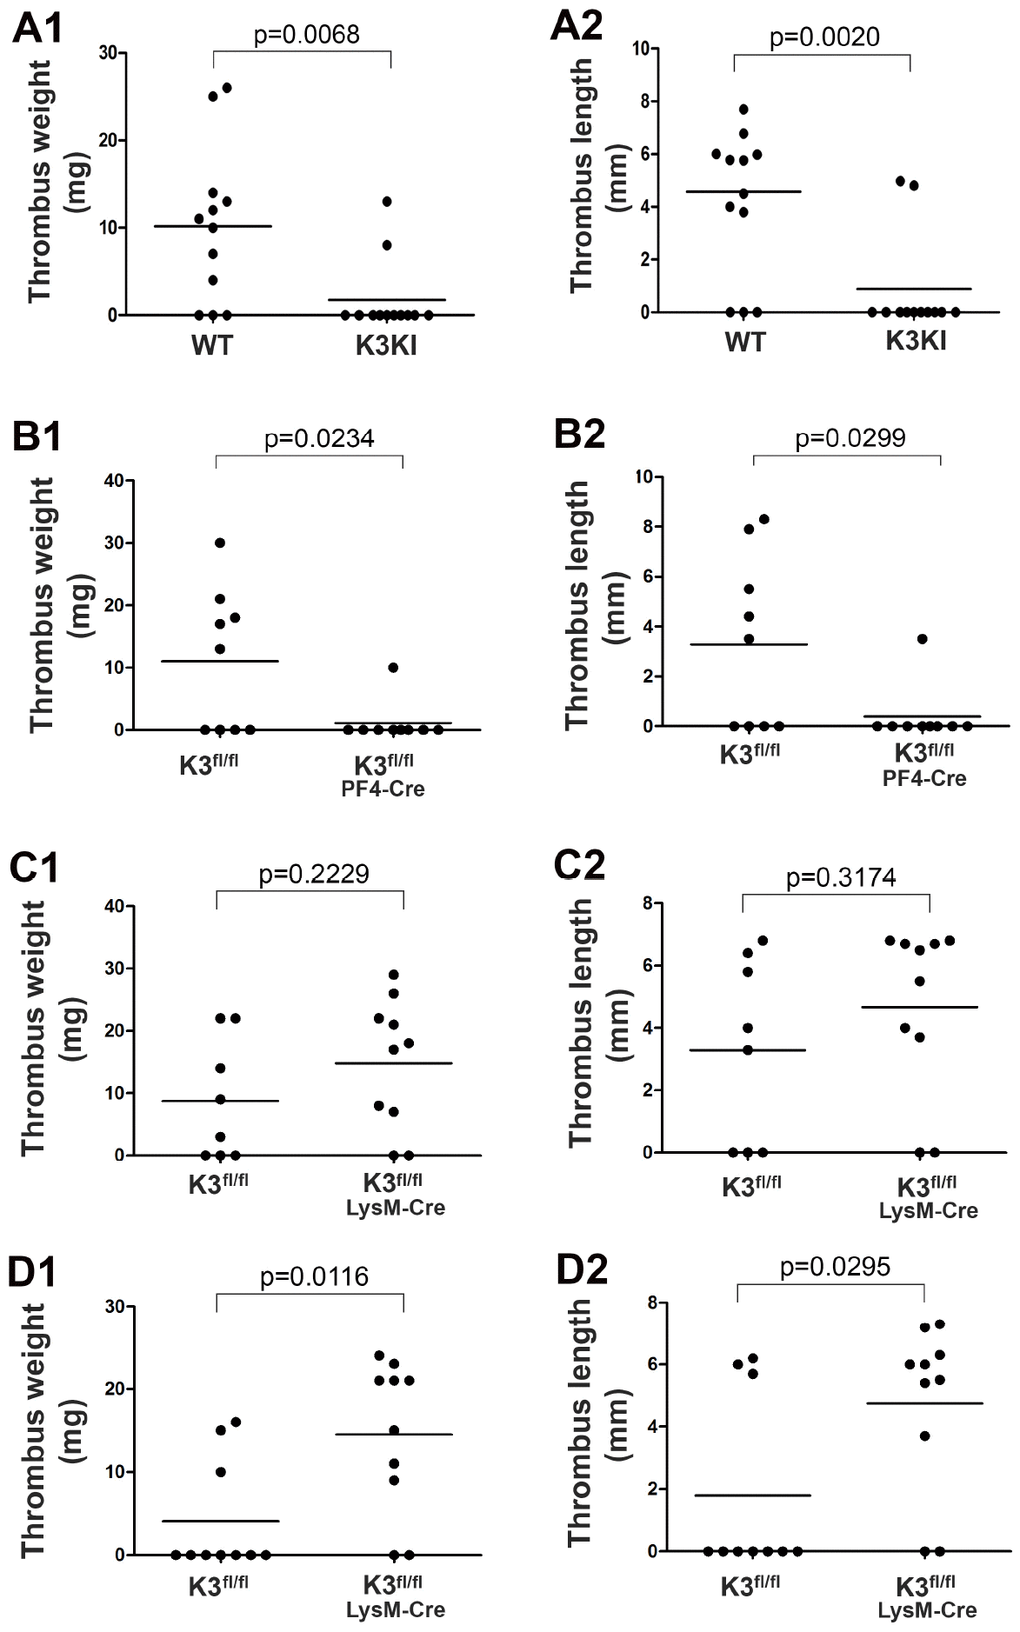 Determine the role of kindlin-3 in platelets and myeloid cells in regulating stenosis-induced DVT in mice. (A1–A2) K3KI mice and wild type littermates were subjected to partial IVC ligation for 48 hours. After that, the IVC tissues were harvested, and thrombus weight and length were evaluated; n = 12 for each group. (B1–B2) Thrombus formation was evaluated in Kindlin-3fl/flPF4 mice and Kindlin-3fl/fl littermates by partially ligating the IVC for 48 hours; n = 9 for each group. (C and D) Partial IVC ligation was applied to Kindlin-3fl/flLysM-Cre mice and Kindlin-3fl/fl littermates for either 48 hours (C1–C2) or 6 hours (D1–D2), and thrombus formation in these mice was evaluated; n ≥ 8 for each group. Dots represent individual experiments for each mouse and lines in dot plots represent mean. A value of P 